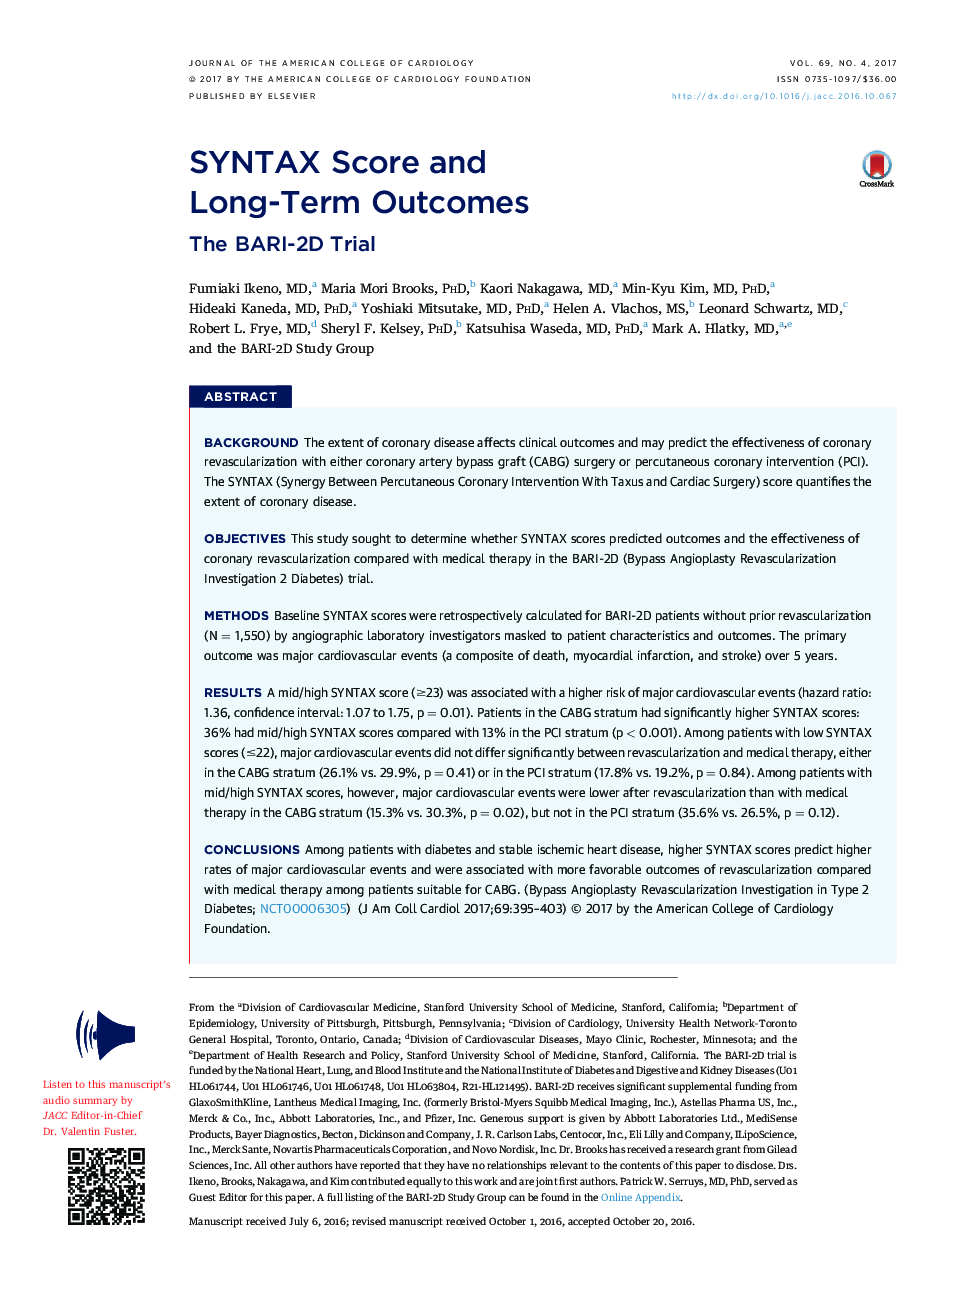 SYNTAX Score and Long-TermÂ Outcomes